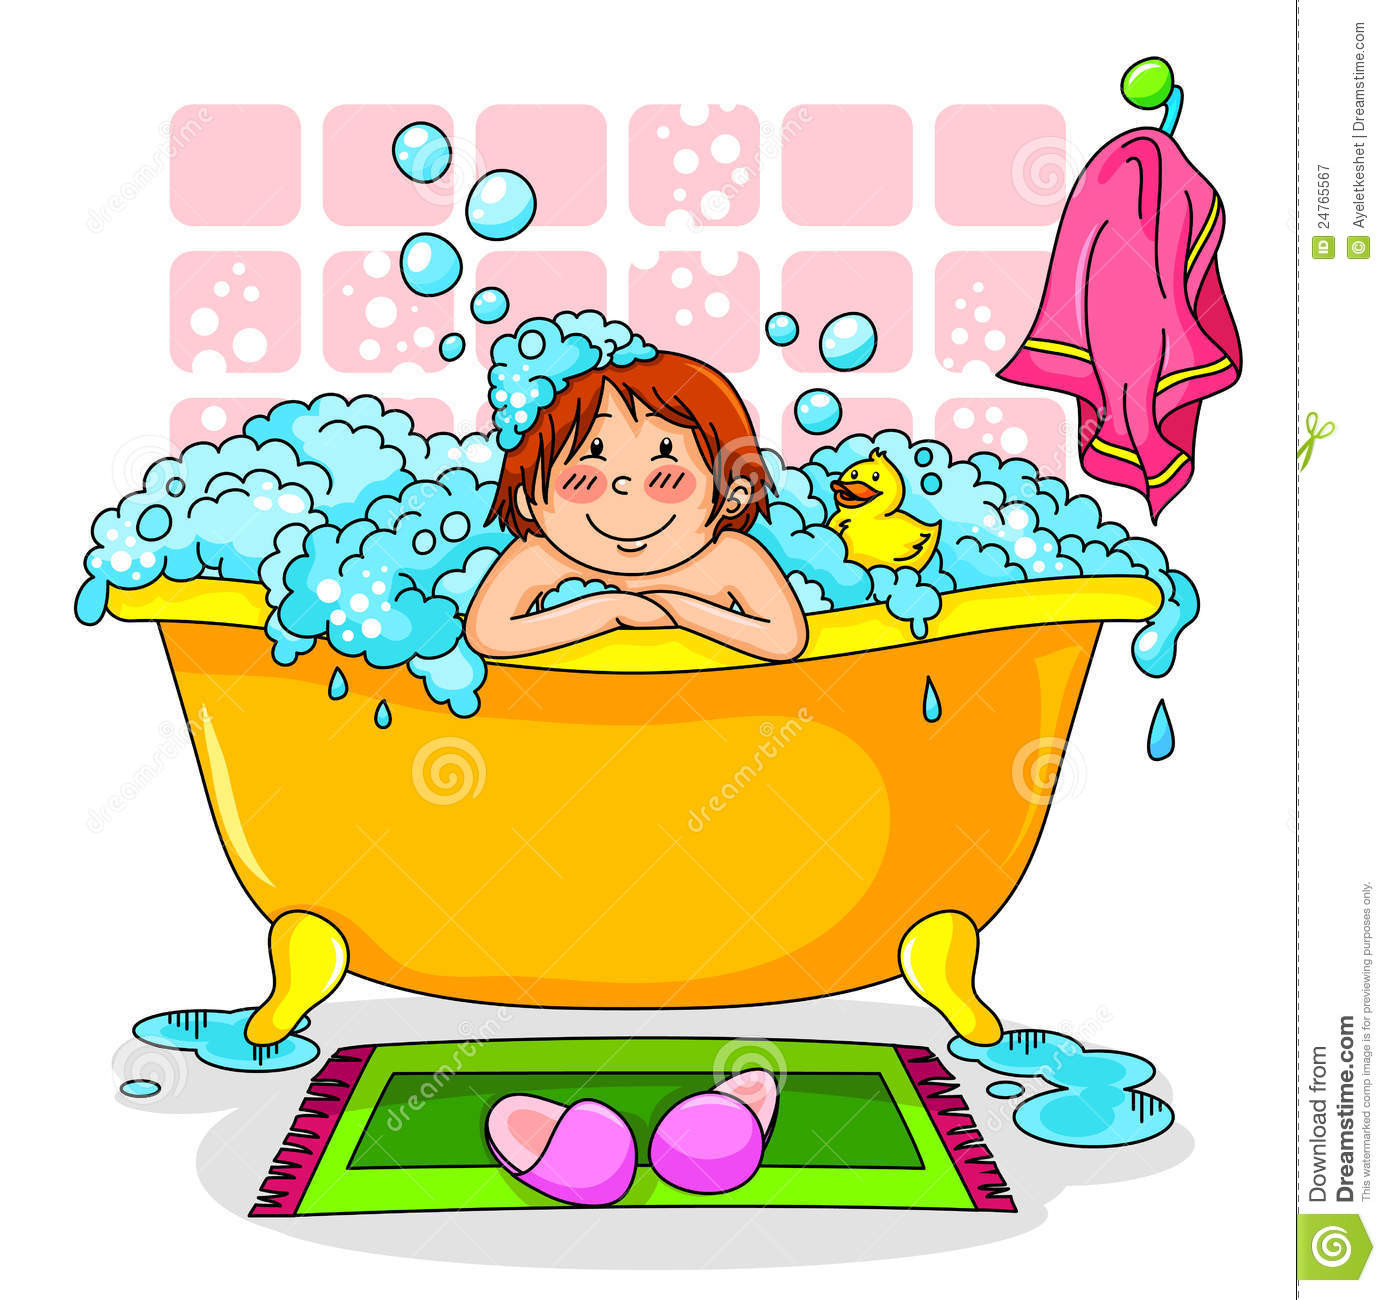 Bathroom Clipart For Kids
 Kid In The Bath Royalty Free Stock graphy Image